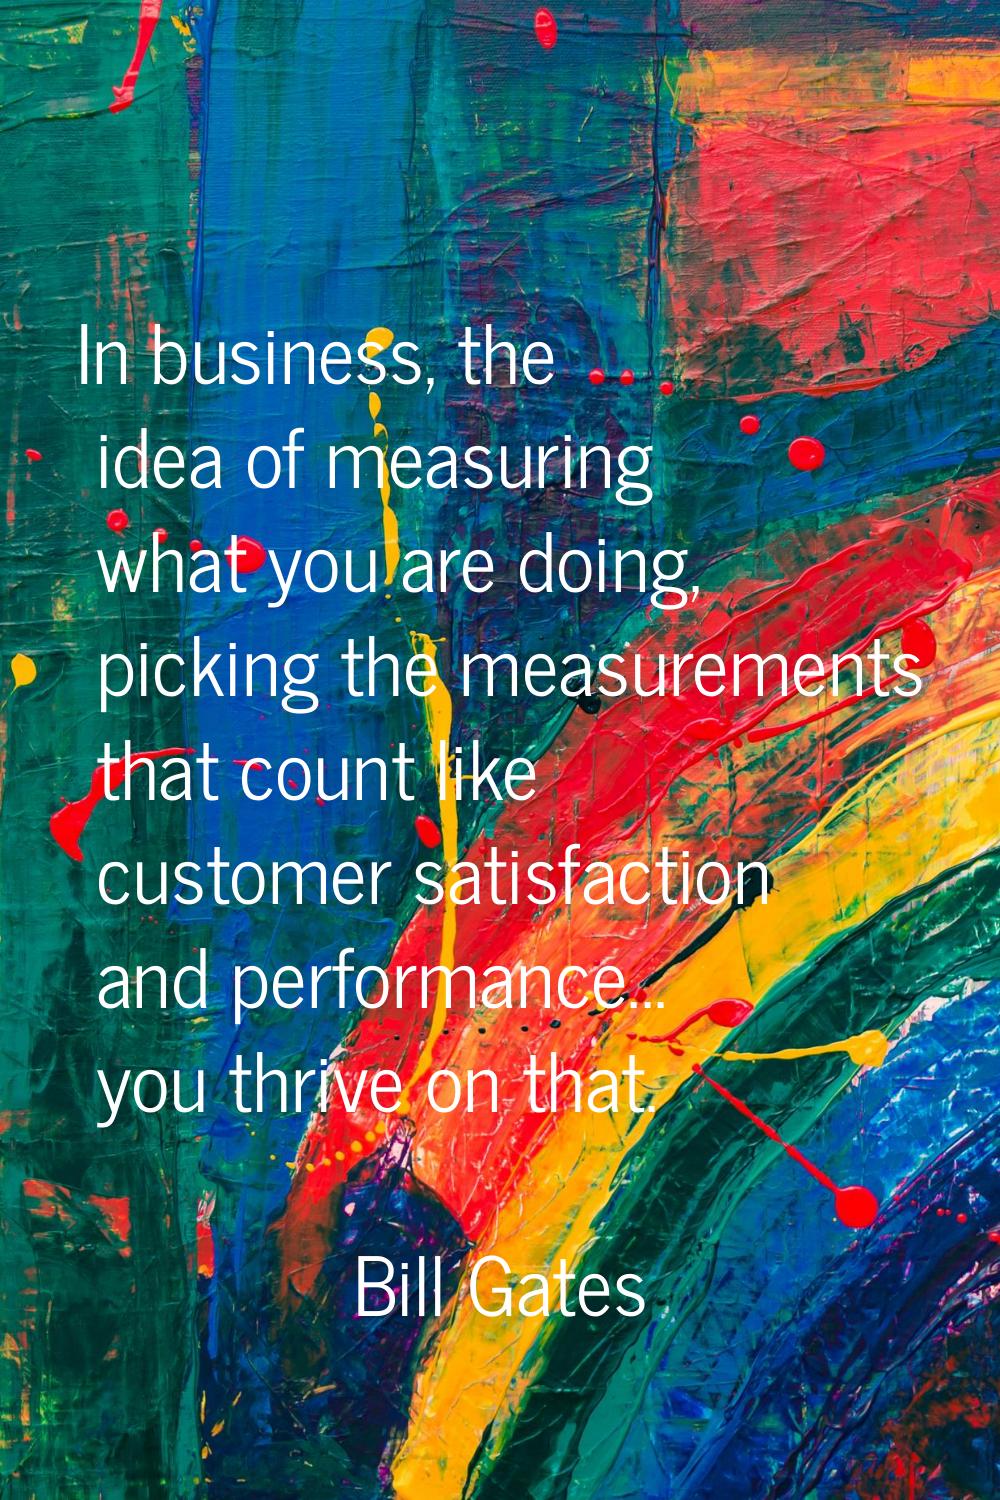 In business, the idea of measuring what you are doing, picking the measurements that count like cus